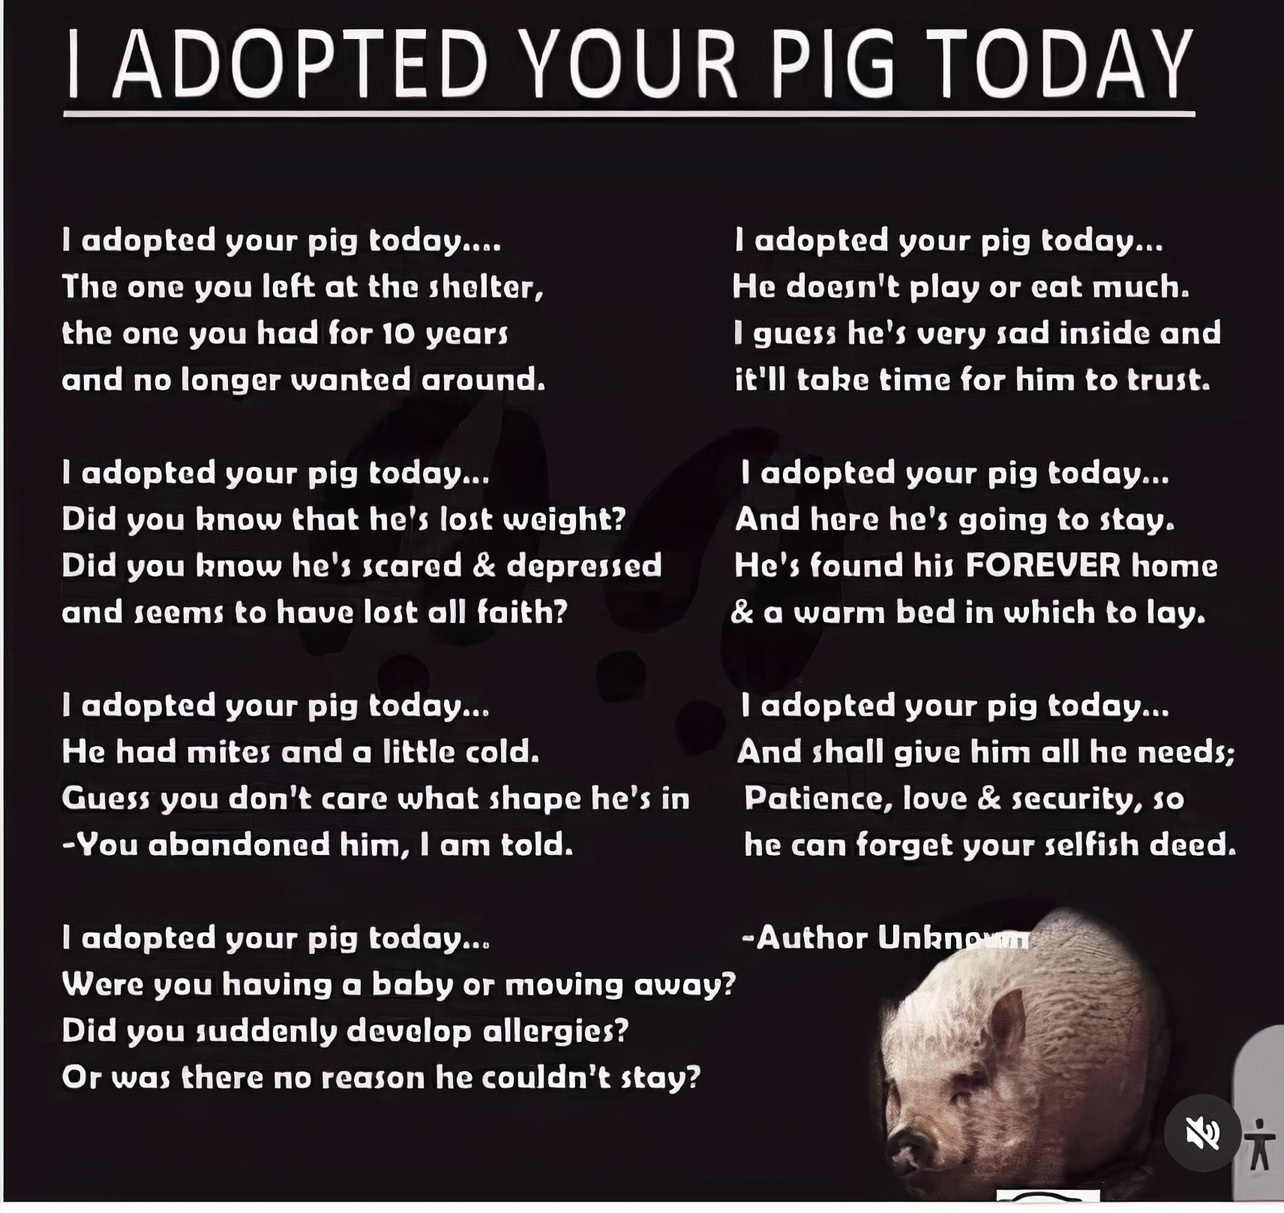 Are you adopted your pig today_LE_auto_x1